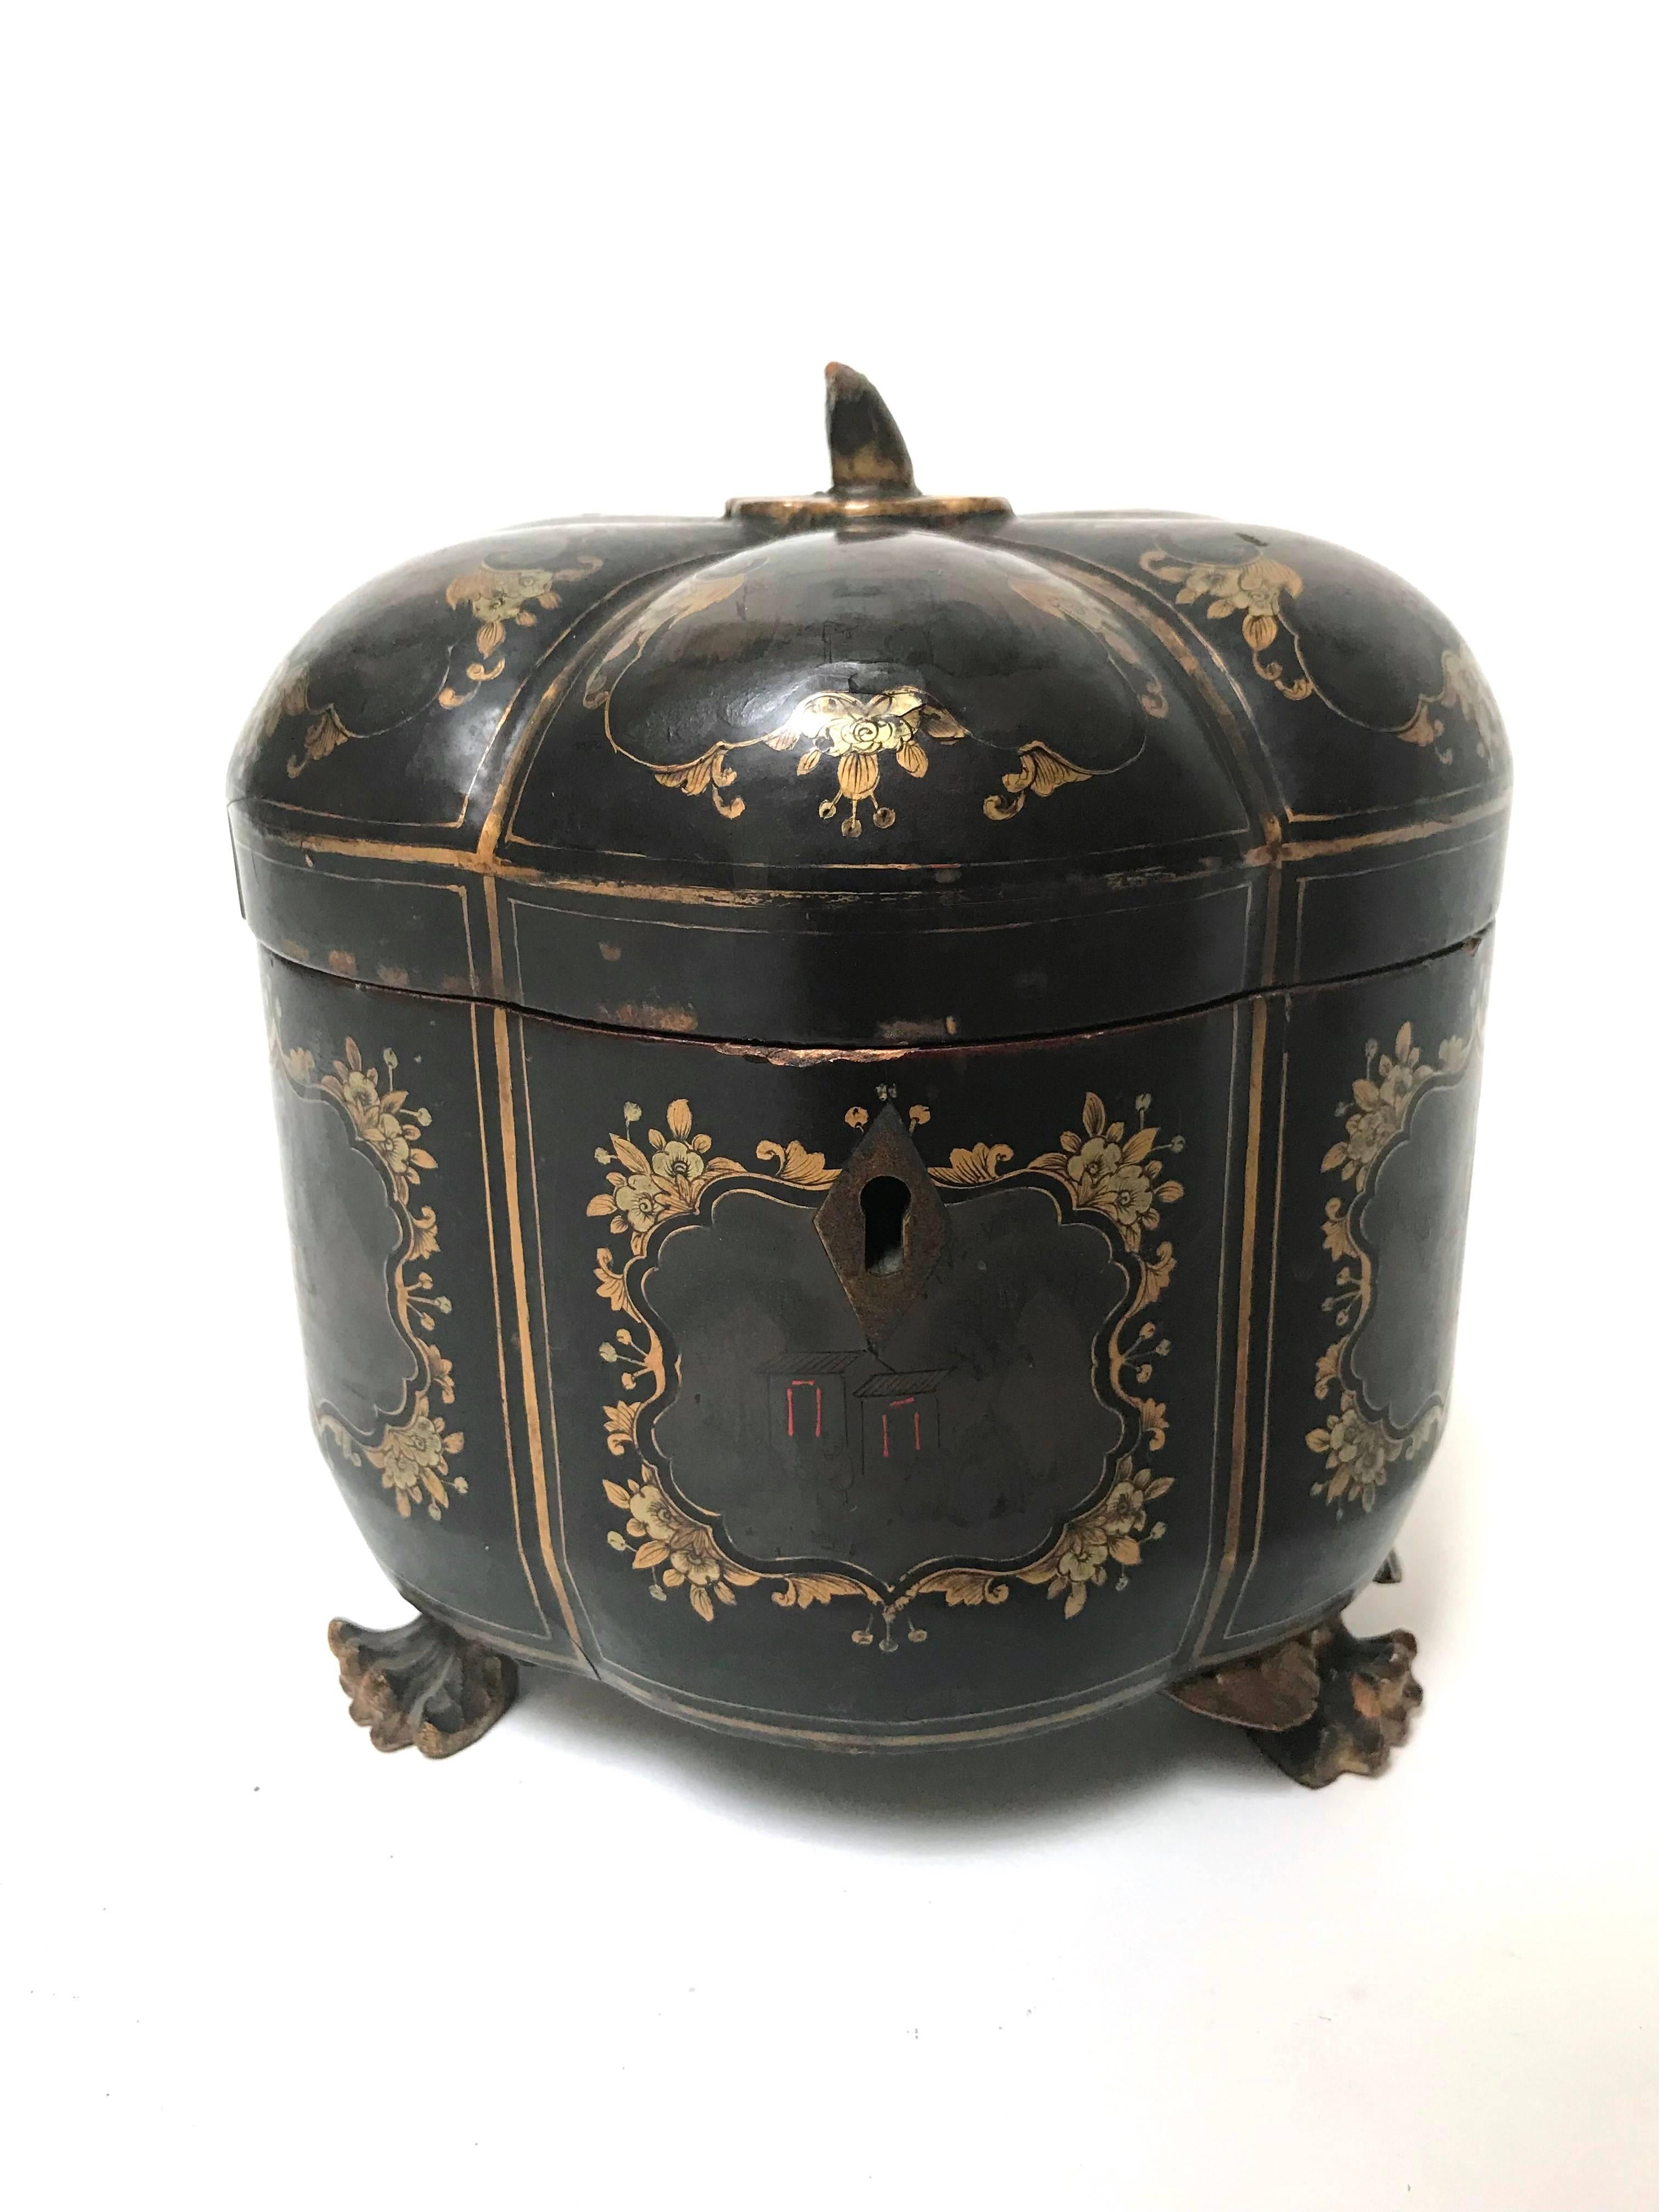 A rare melon form Chinese export lacquerware tea caddy and liner, circa 1830s, comprising six radially lobed segments, the face of each decorated with a (faded) scenic panel cartouche framed in gilt florals, the gilding repeated on the cover topped